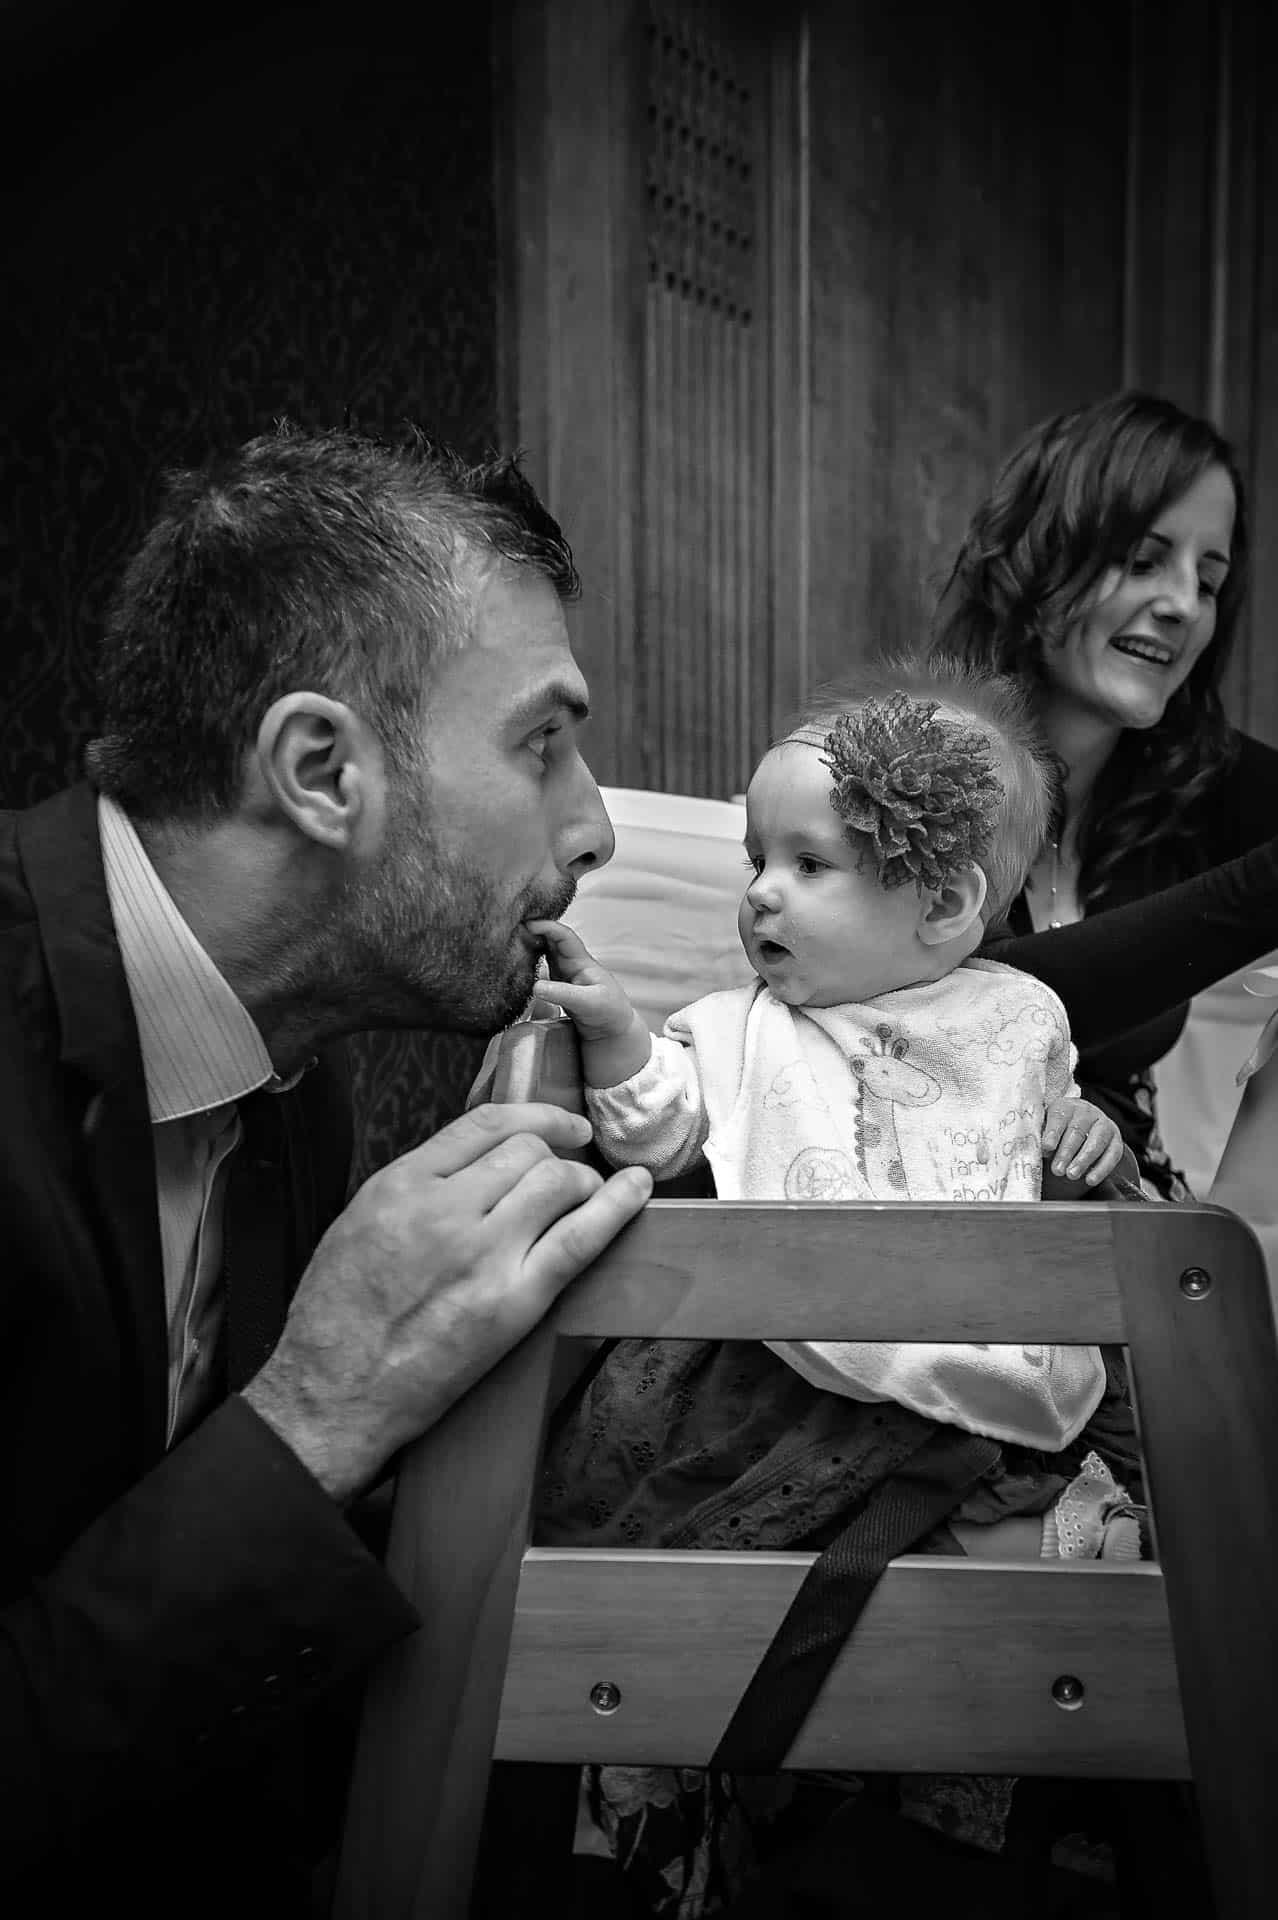 Baby with hand in man's mouth at wedding